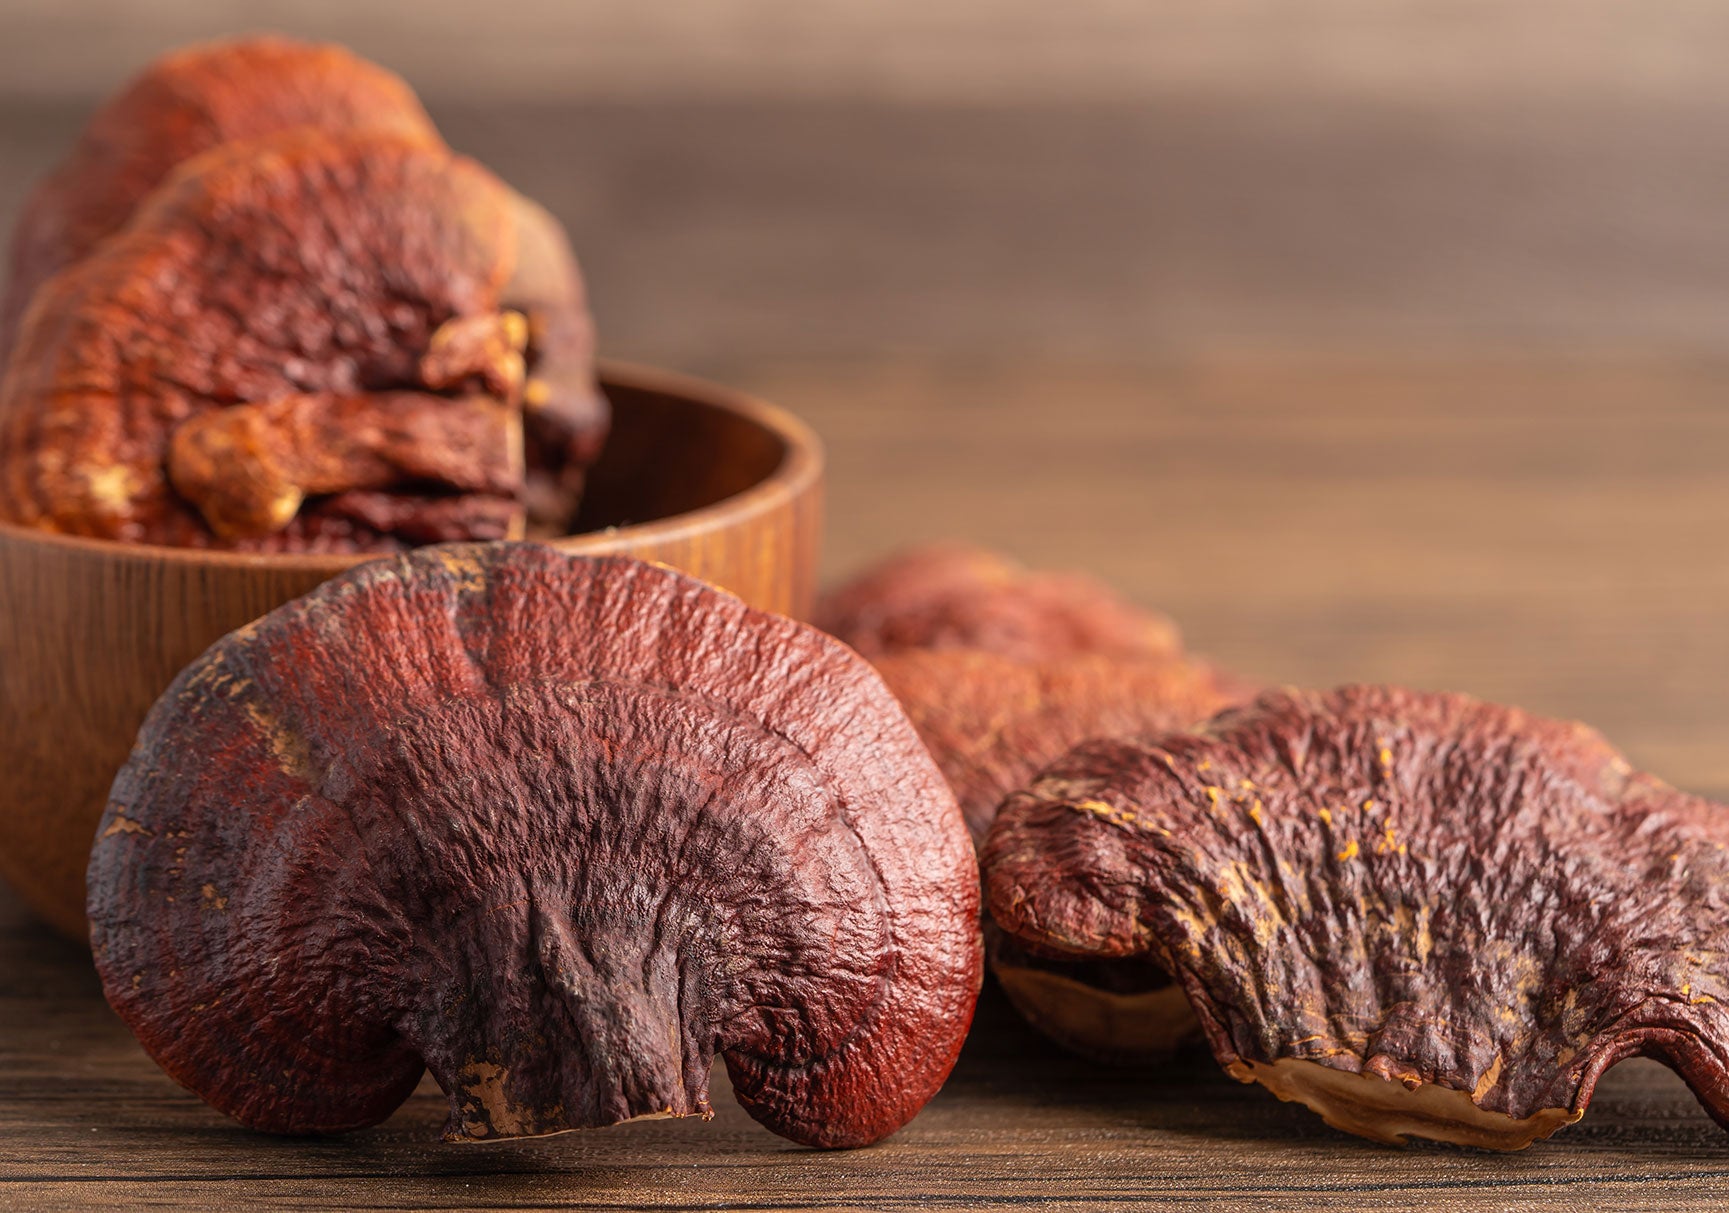 Dried lingzhi mushroom on wooden background.